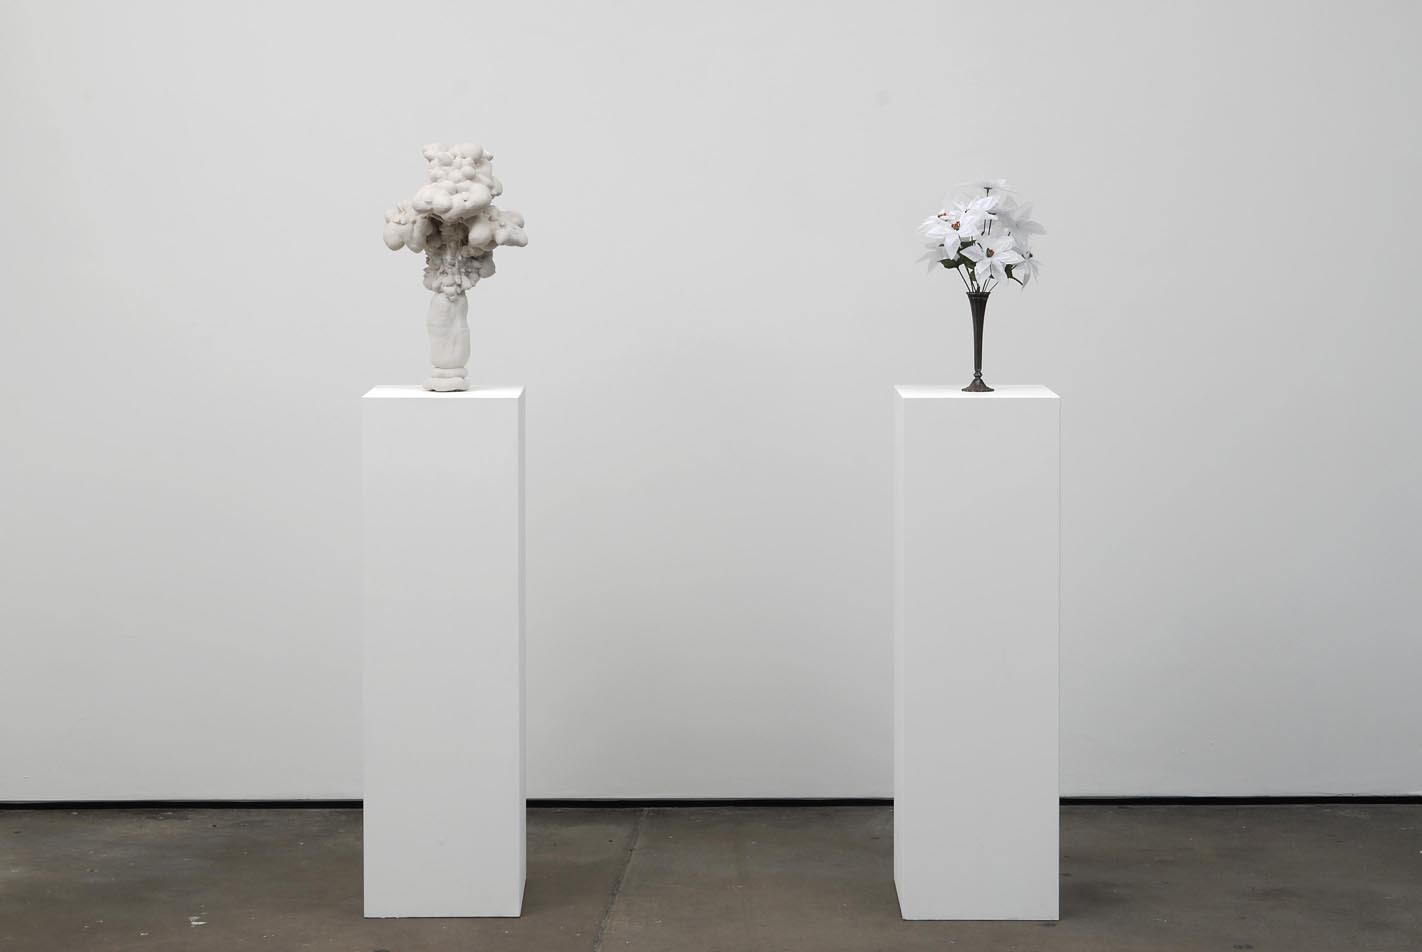     Peter Coffin Untitled (flowers) 2009 Found object and plaster, crystalline silica, vinyl, polymer and surface salt 43 x 30 x 30 cm; 50 x 38 x 38 cm 